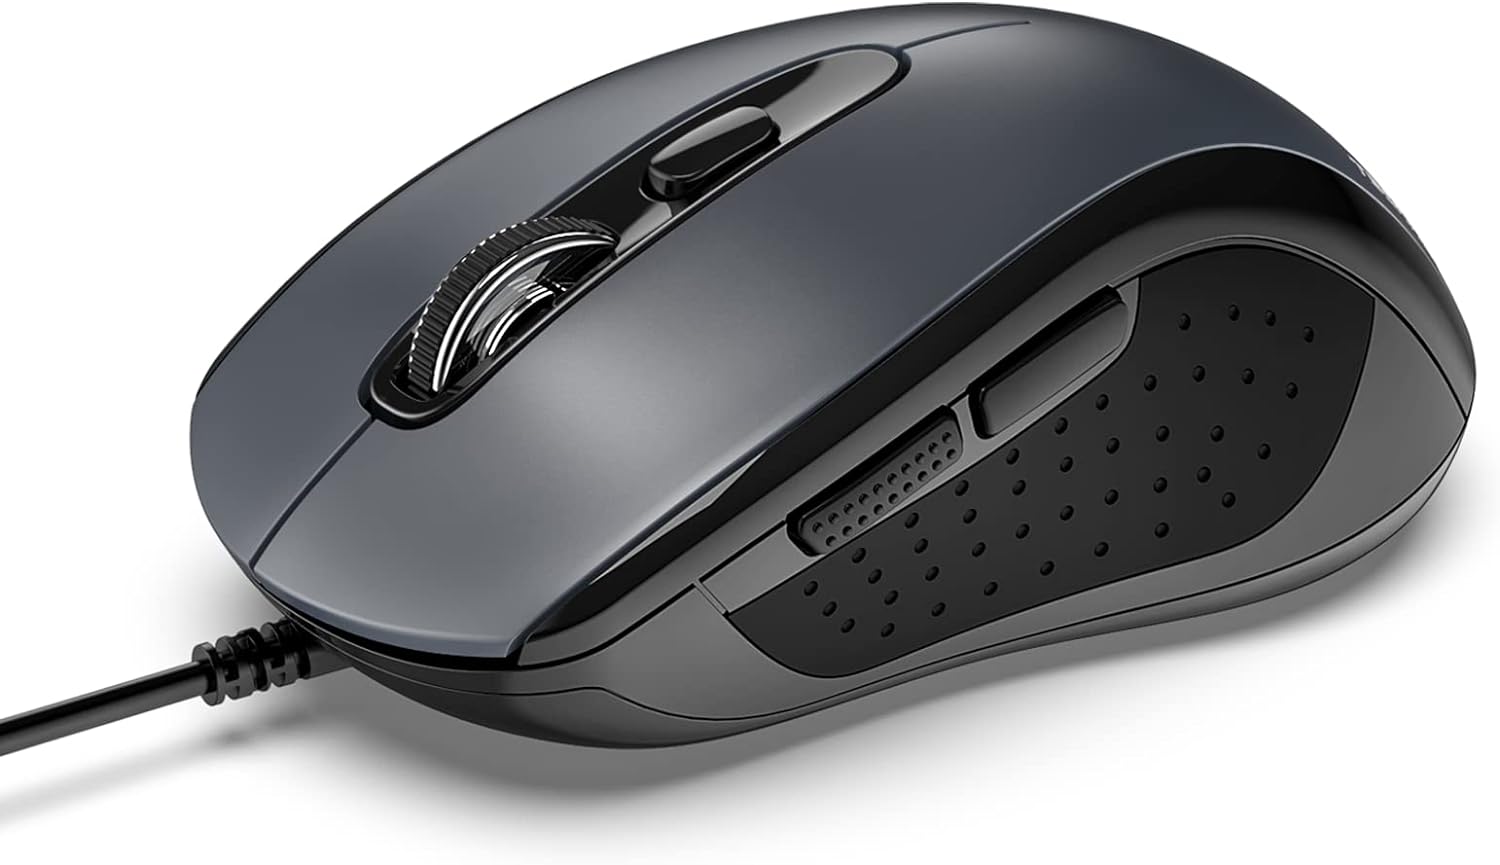 How Do You Program The Buttons On A Tecknet Gaming Mouse?